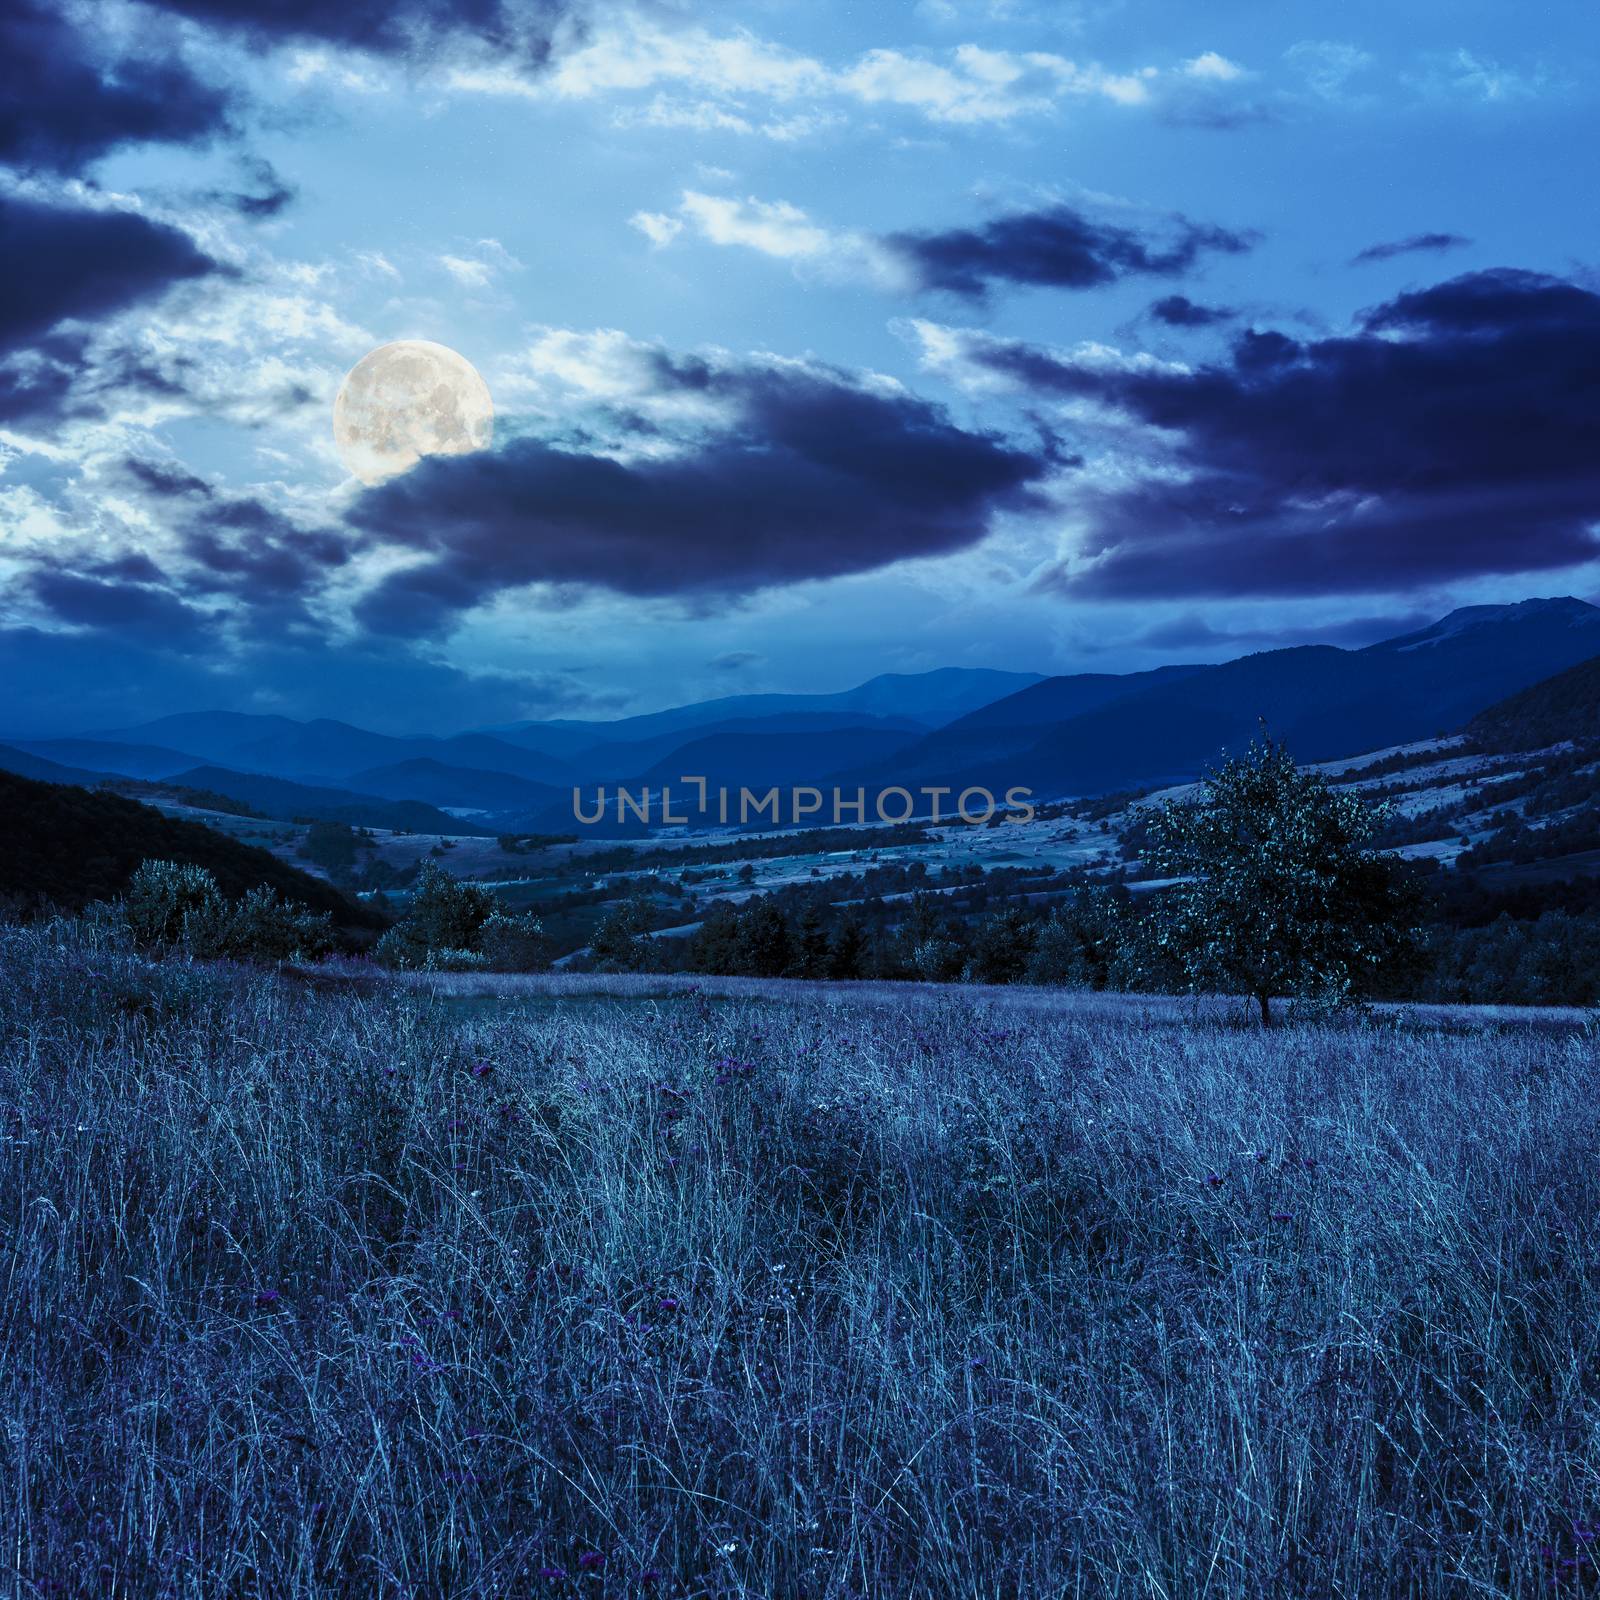 summer counrtyside landscape with tree on meadow in mountains and haystacks on a far green slope at night in full moon light